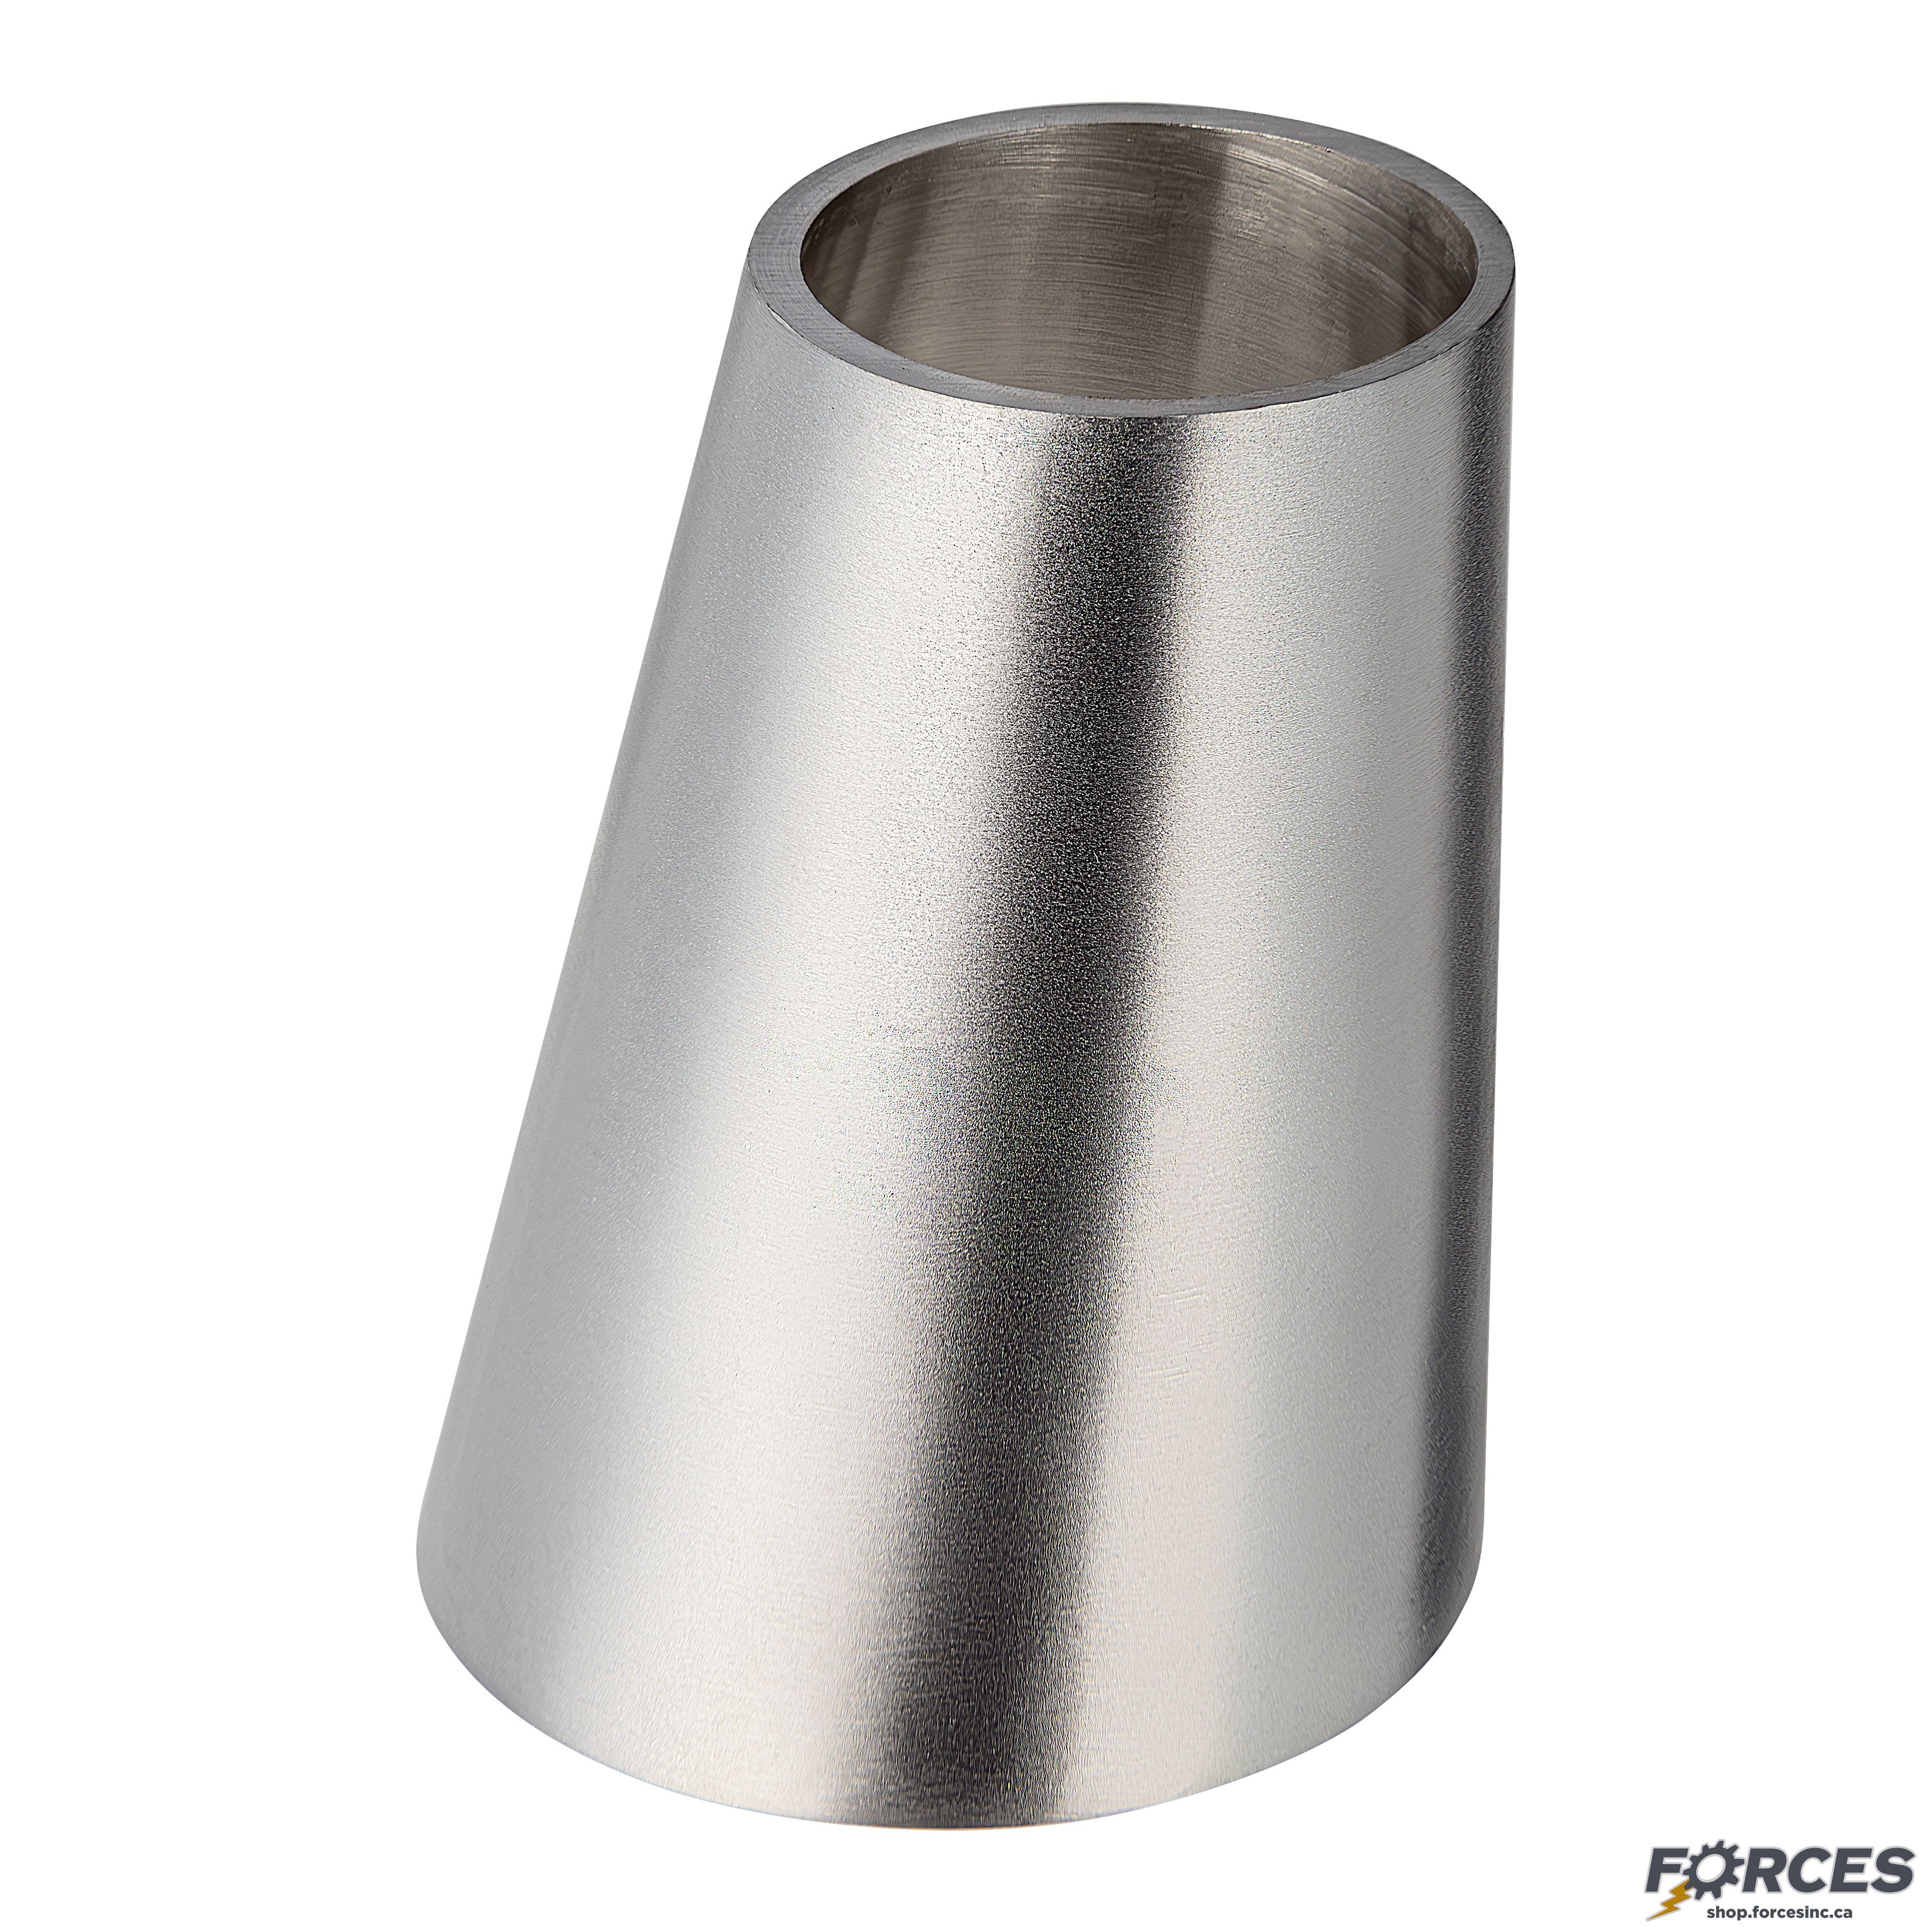 1-1/2" x 1" Butt Weld Eccentric Reducer - Stainless Steel 316 - Forces Inc